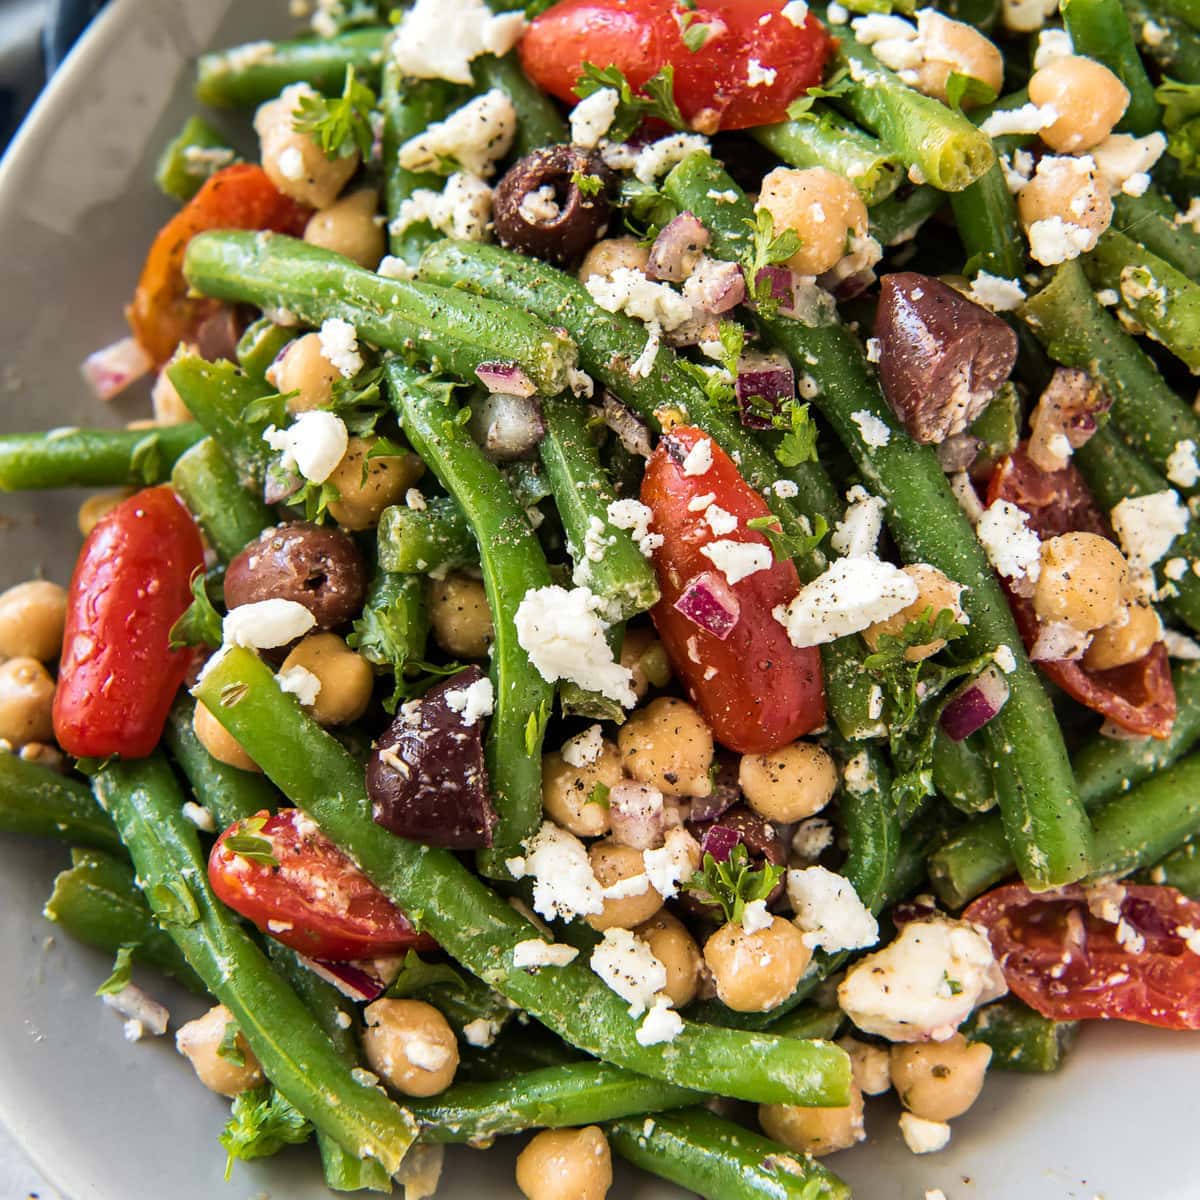 Green beans with feta, tomatoes, olives, and chickpeas